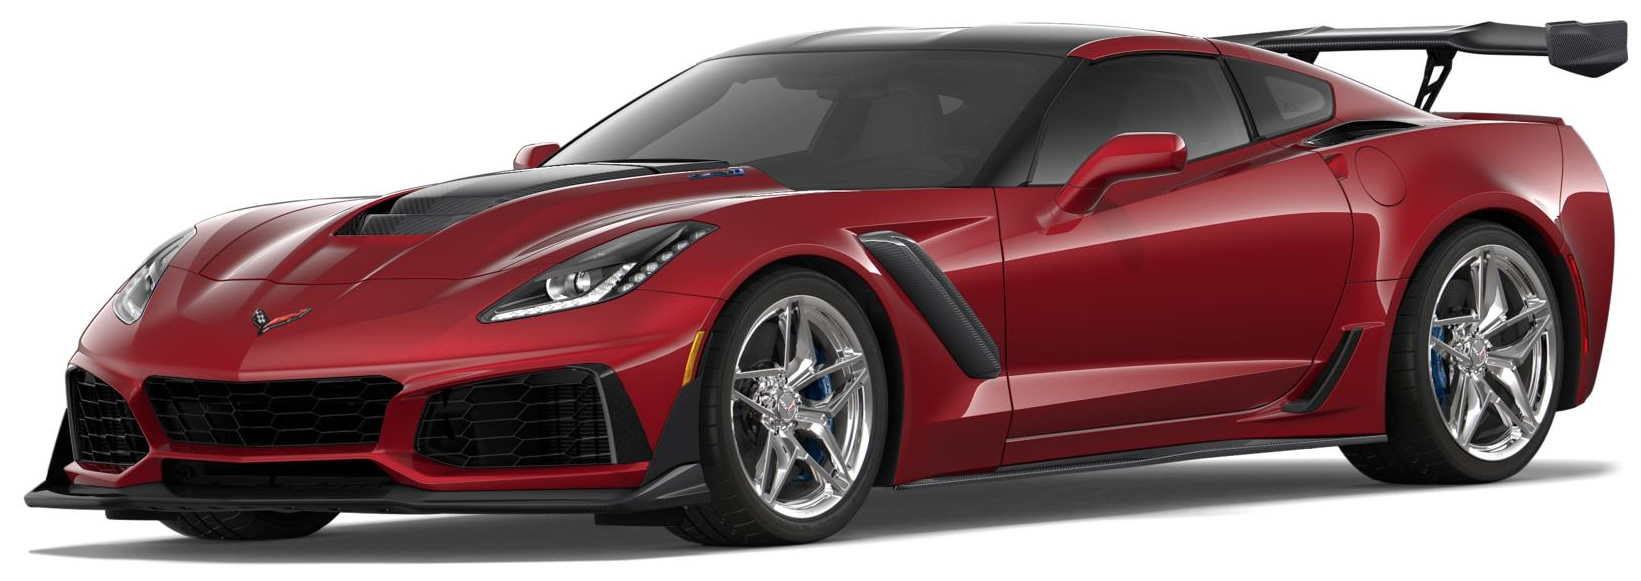 2019 Corvette ZR1 Coupe in Long Beach Red Metallic with the ZTK Track Performance Package and Chrome Wheels